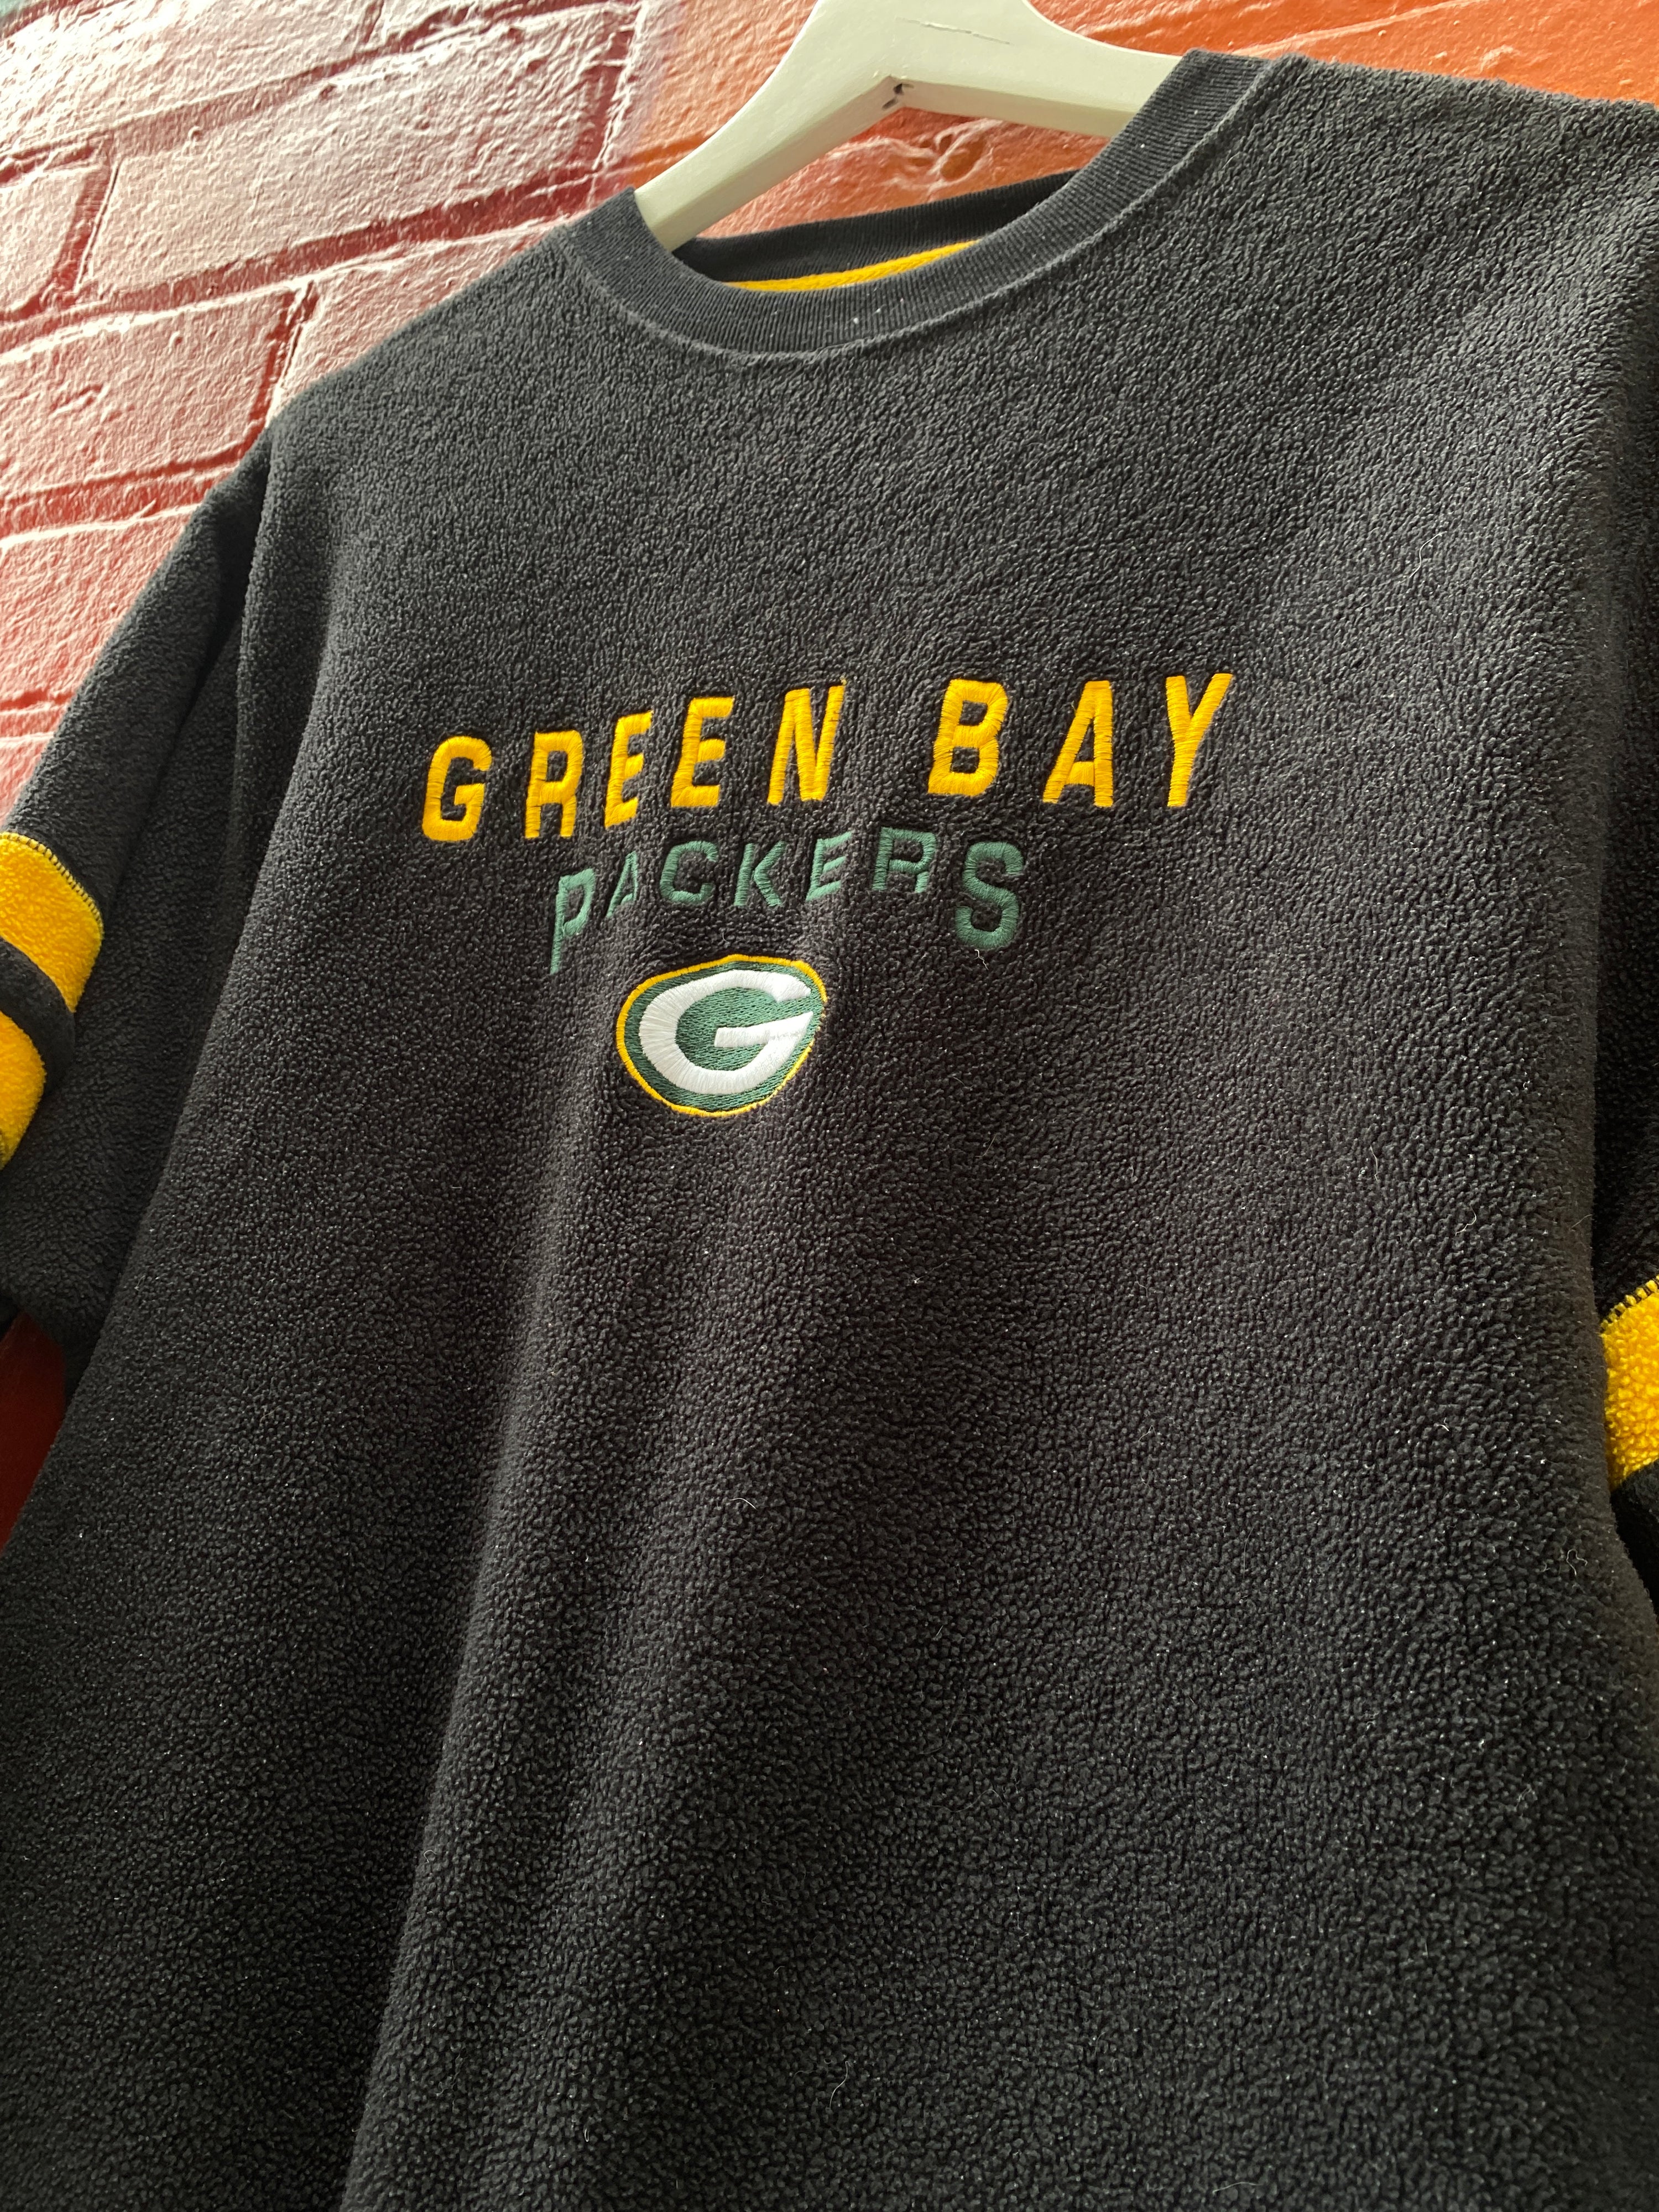 M - Green Bay Packers Black Fleece Embroidered Jumper